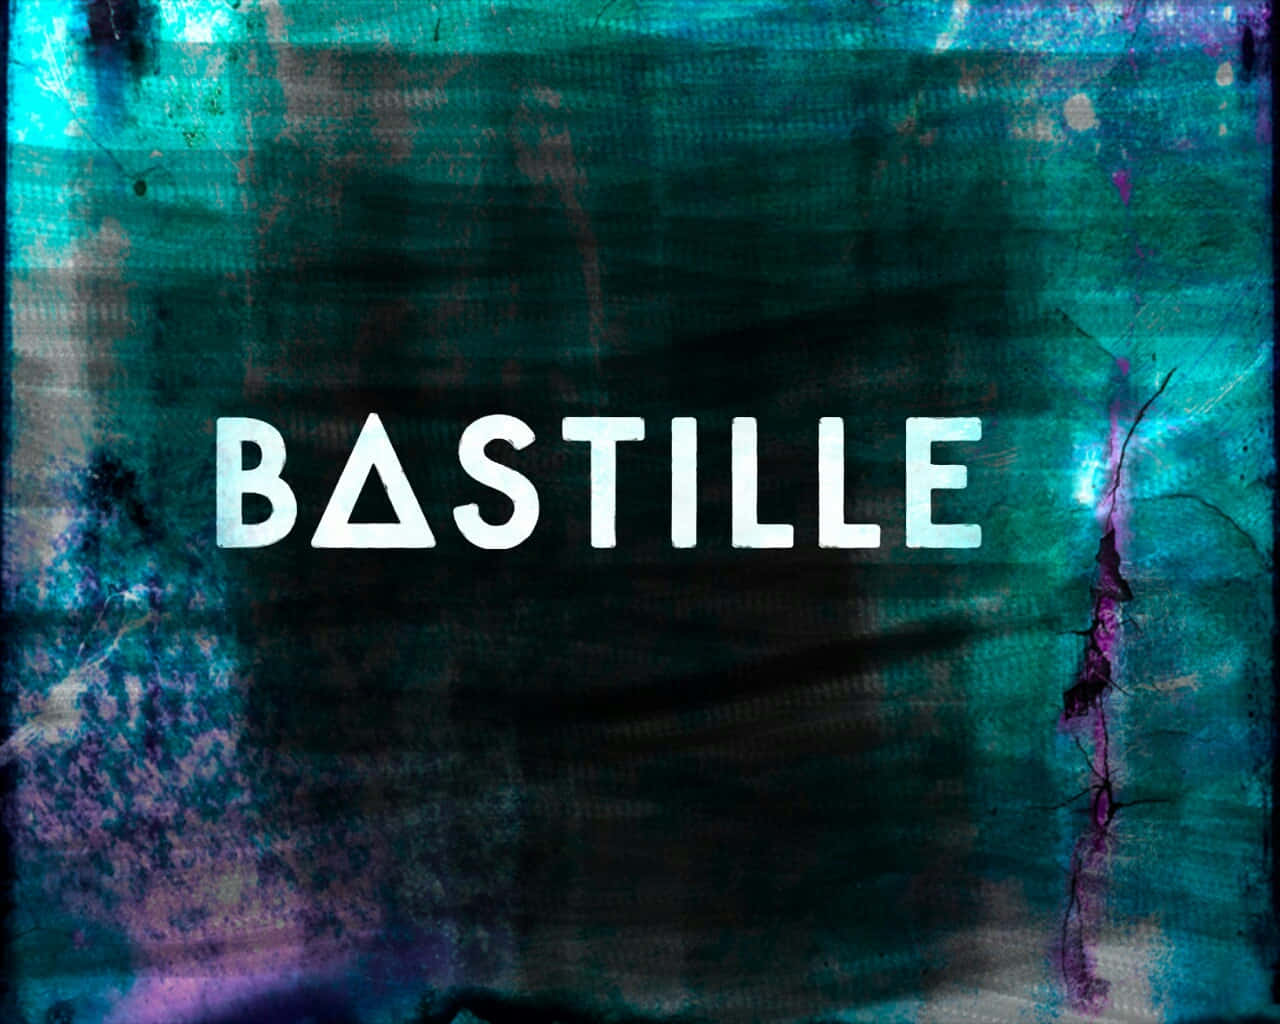 "Bastille is here to stay"